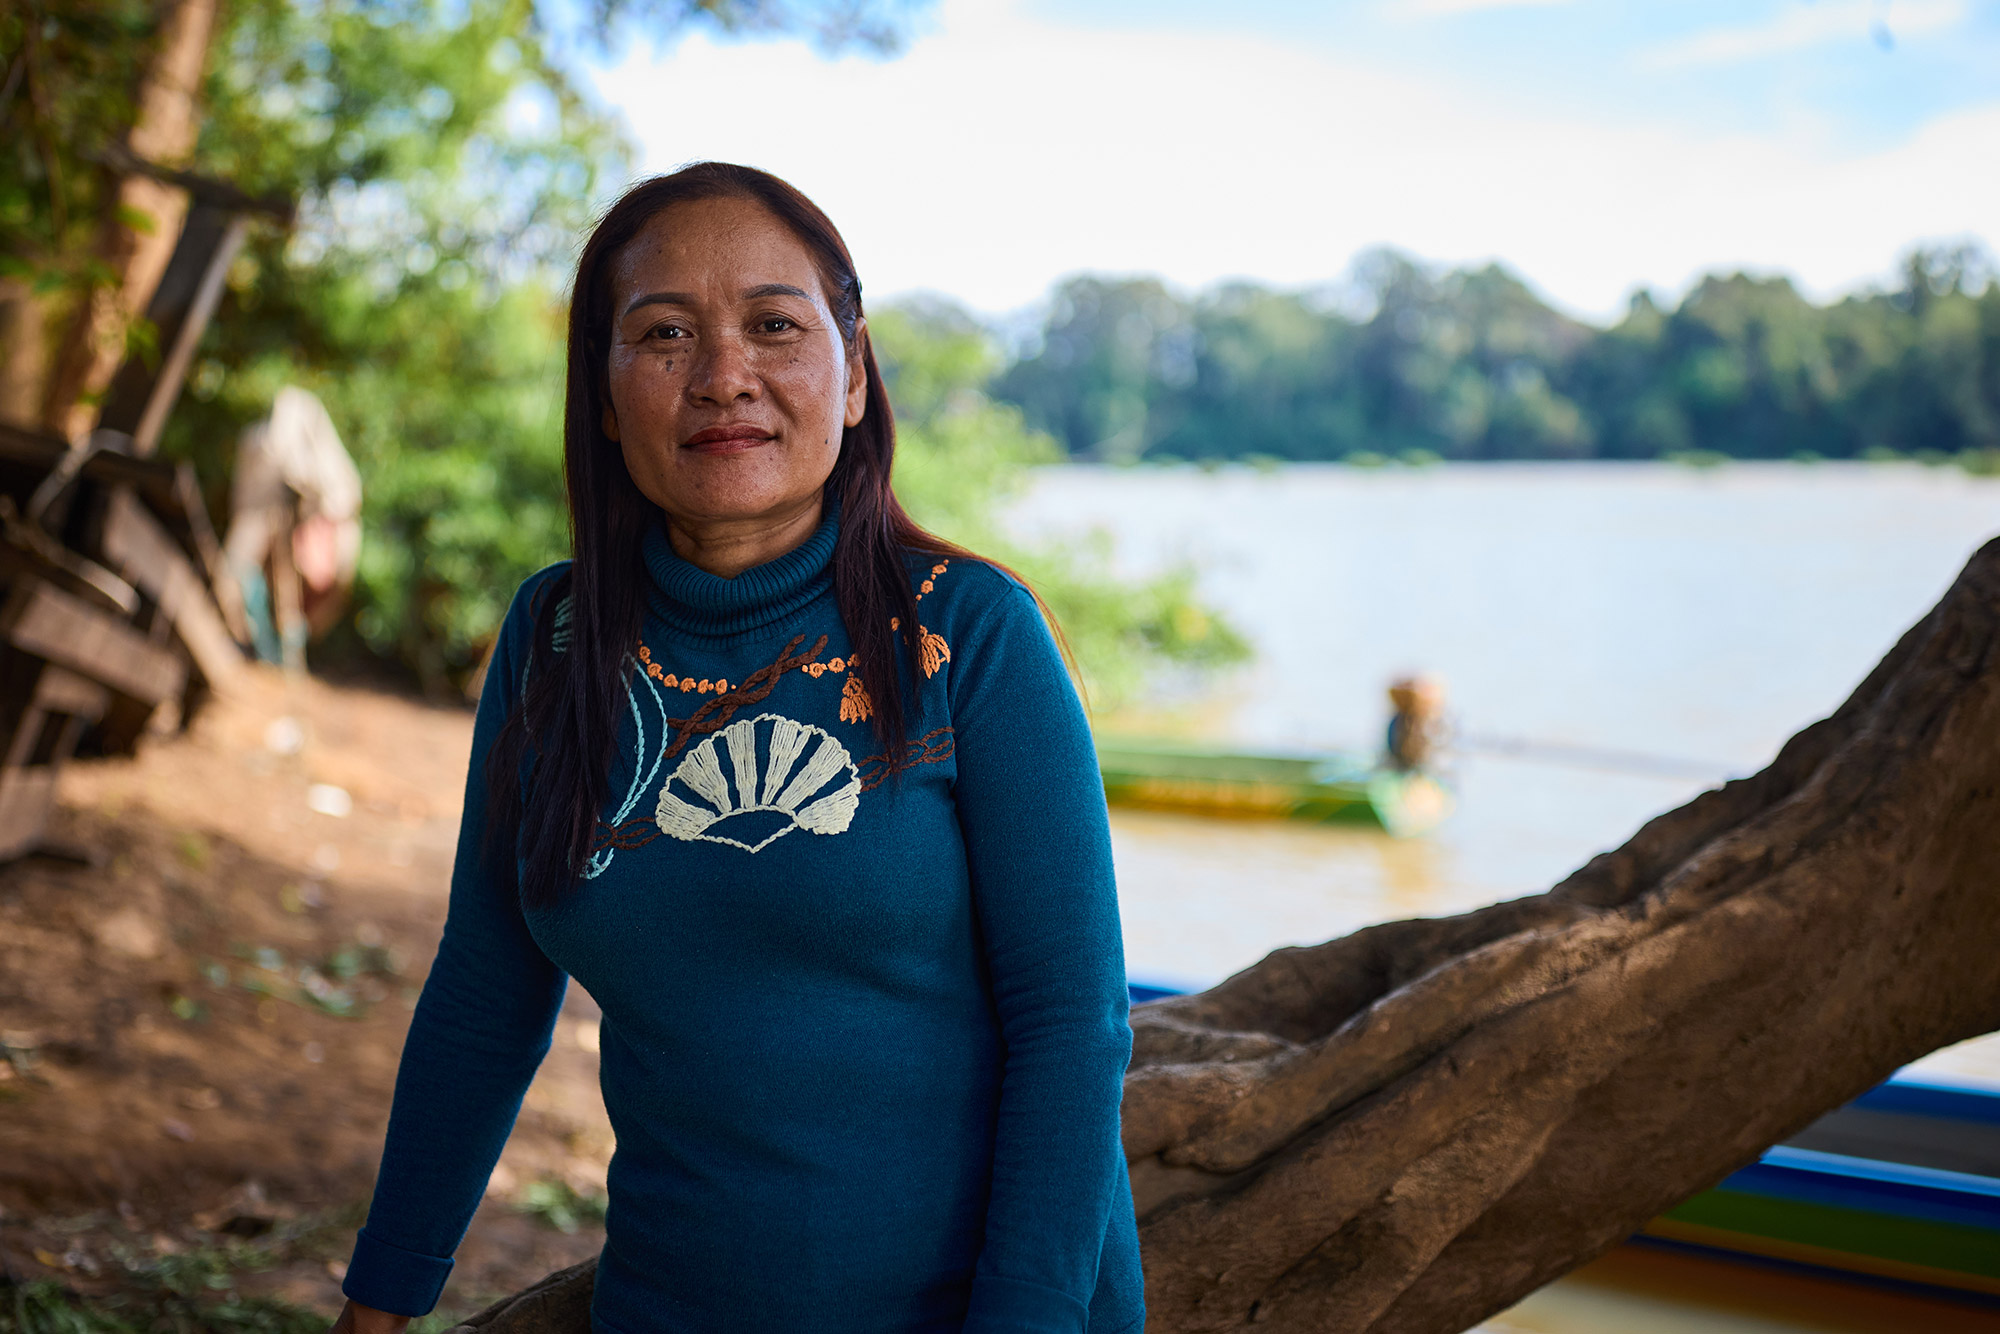 Cambodia: Siphon is a community activist who was trained and coached by 3SPN to advocate for community issues with the local authorities. She is a leader in her community and a part of the local fisheries network. Photo: Patrick Moran/Oxfam